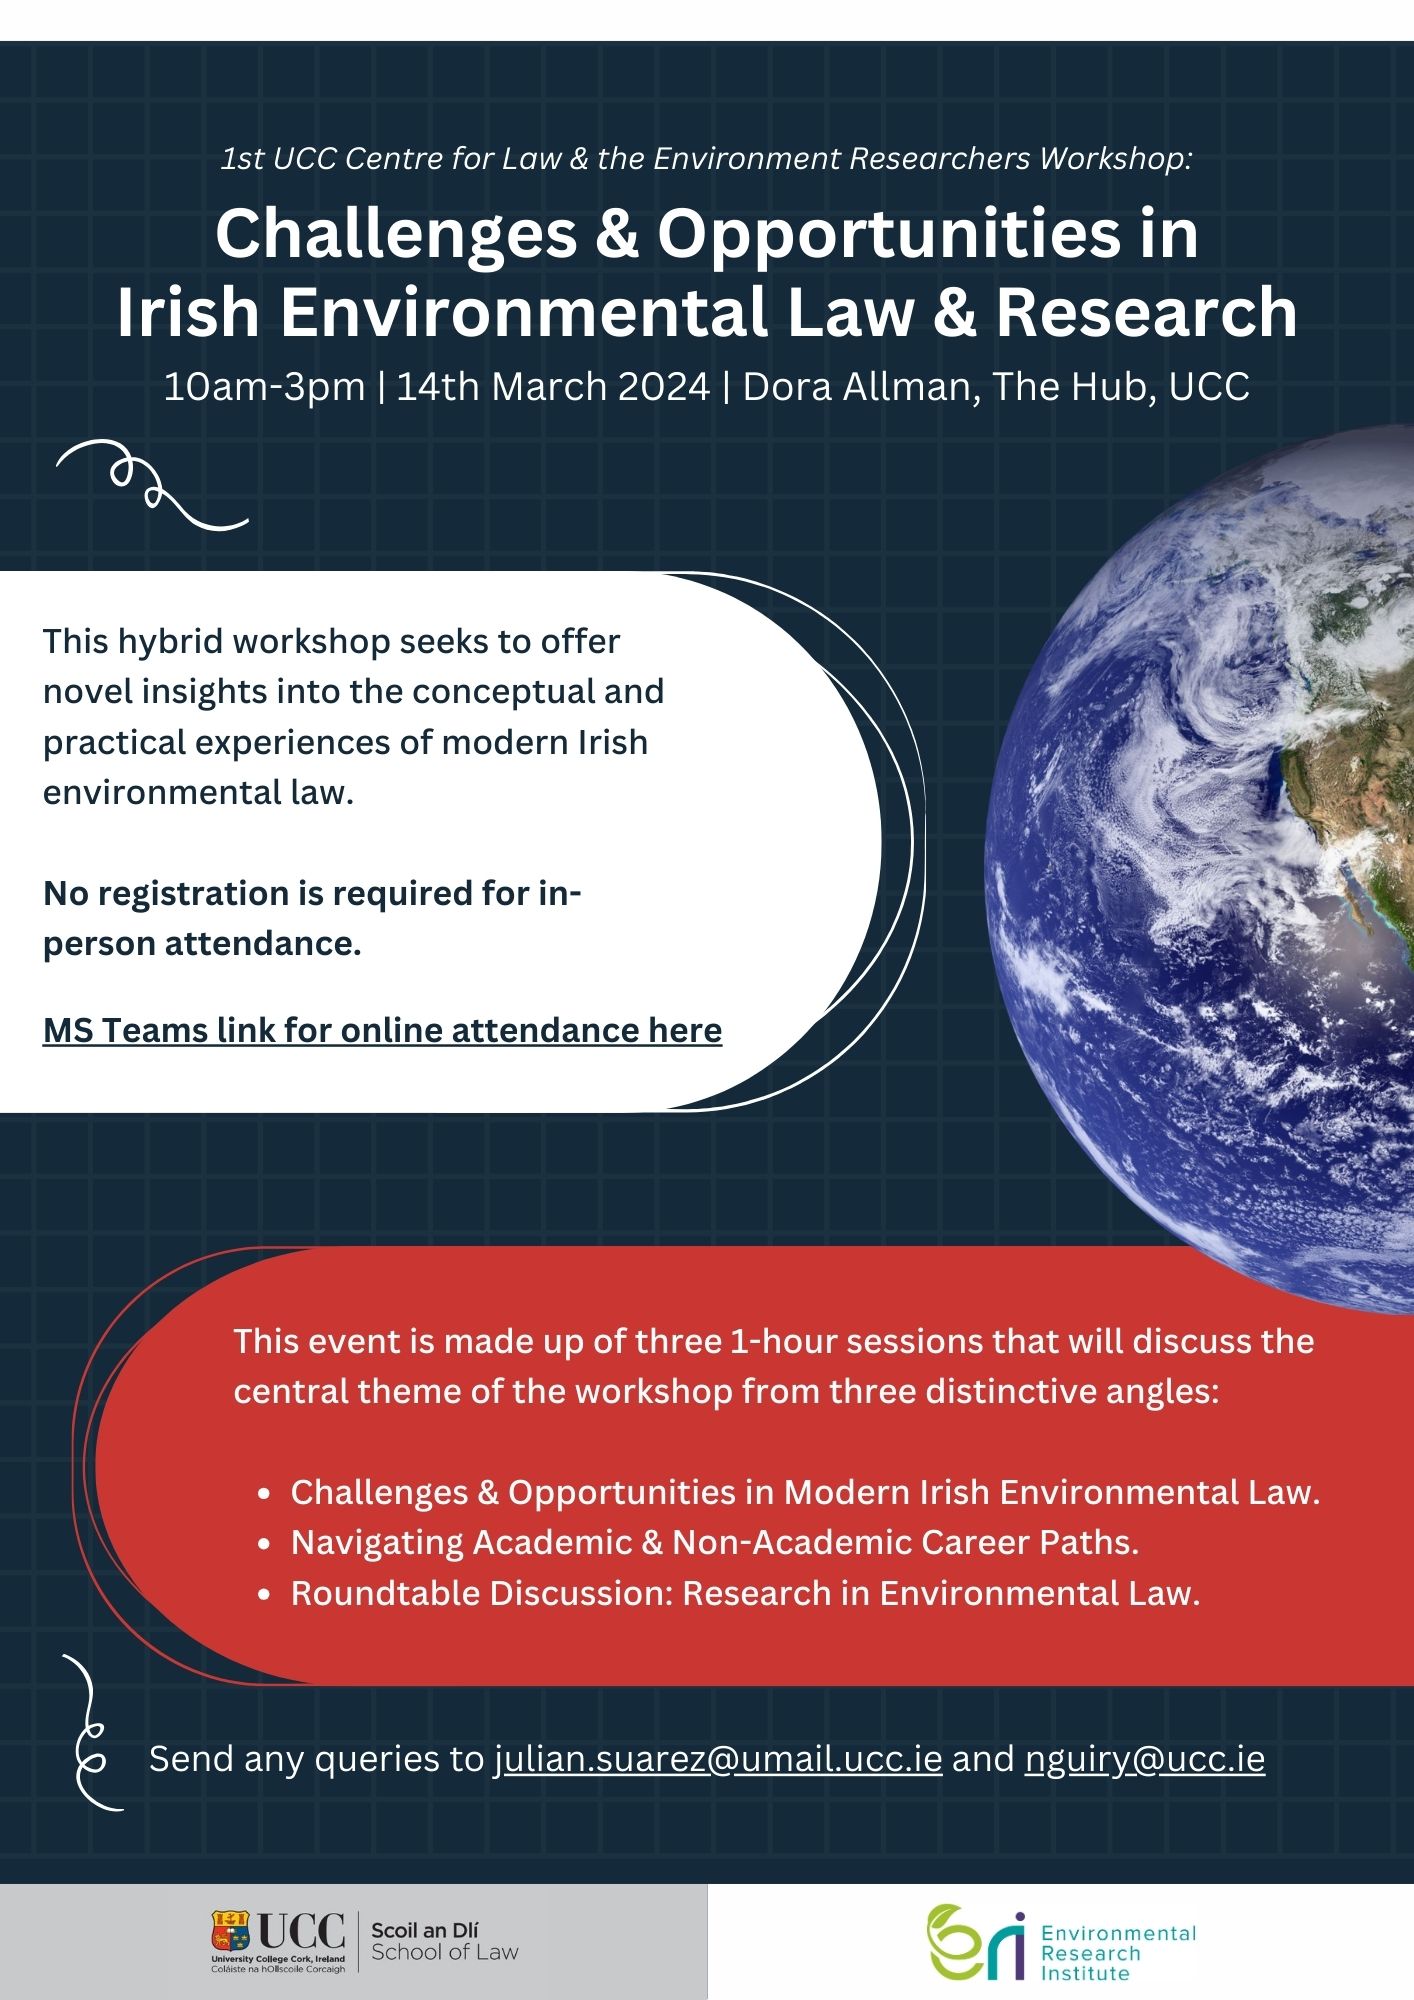 Challenges & Opportunities in Irish Environmental Law & Research Workshop